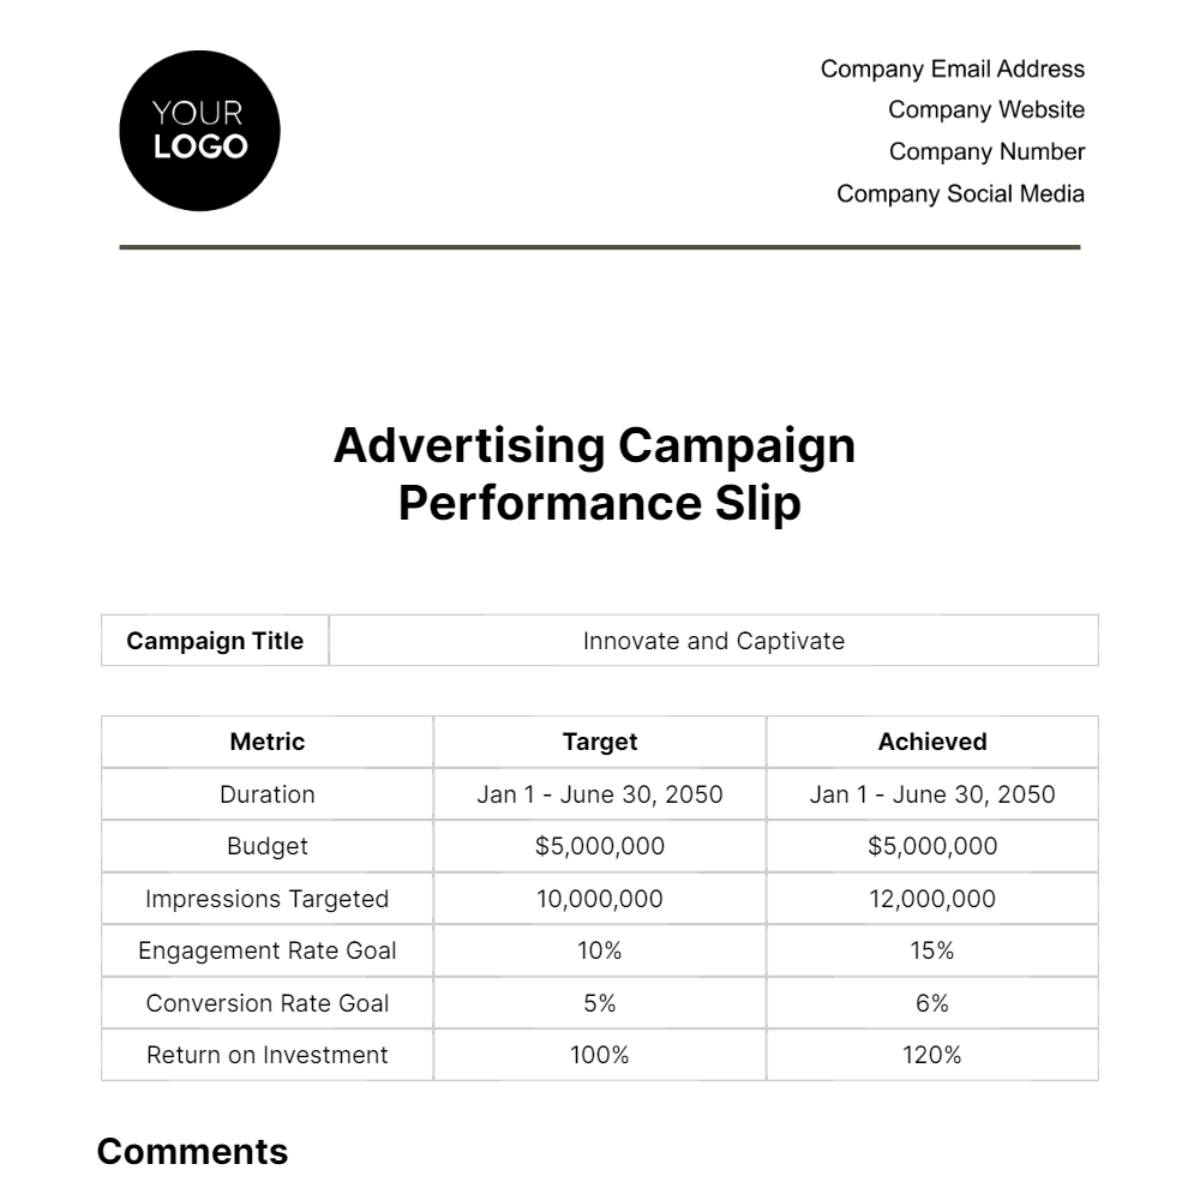 Advertising Campaign Performance Slip Template